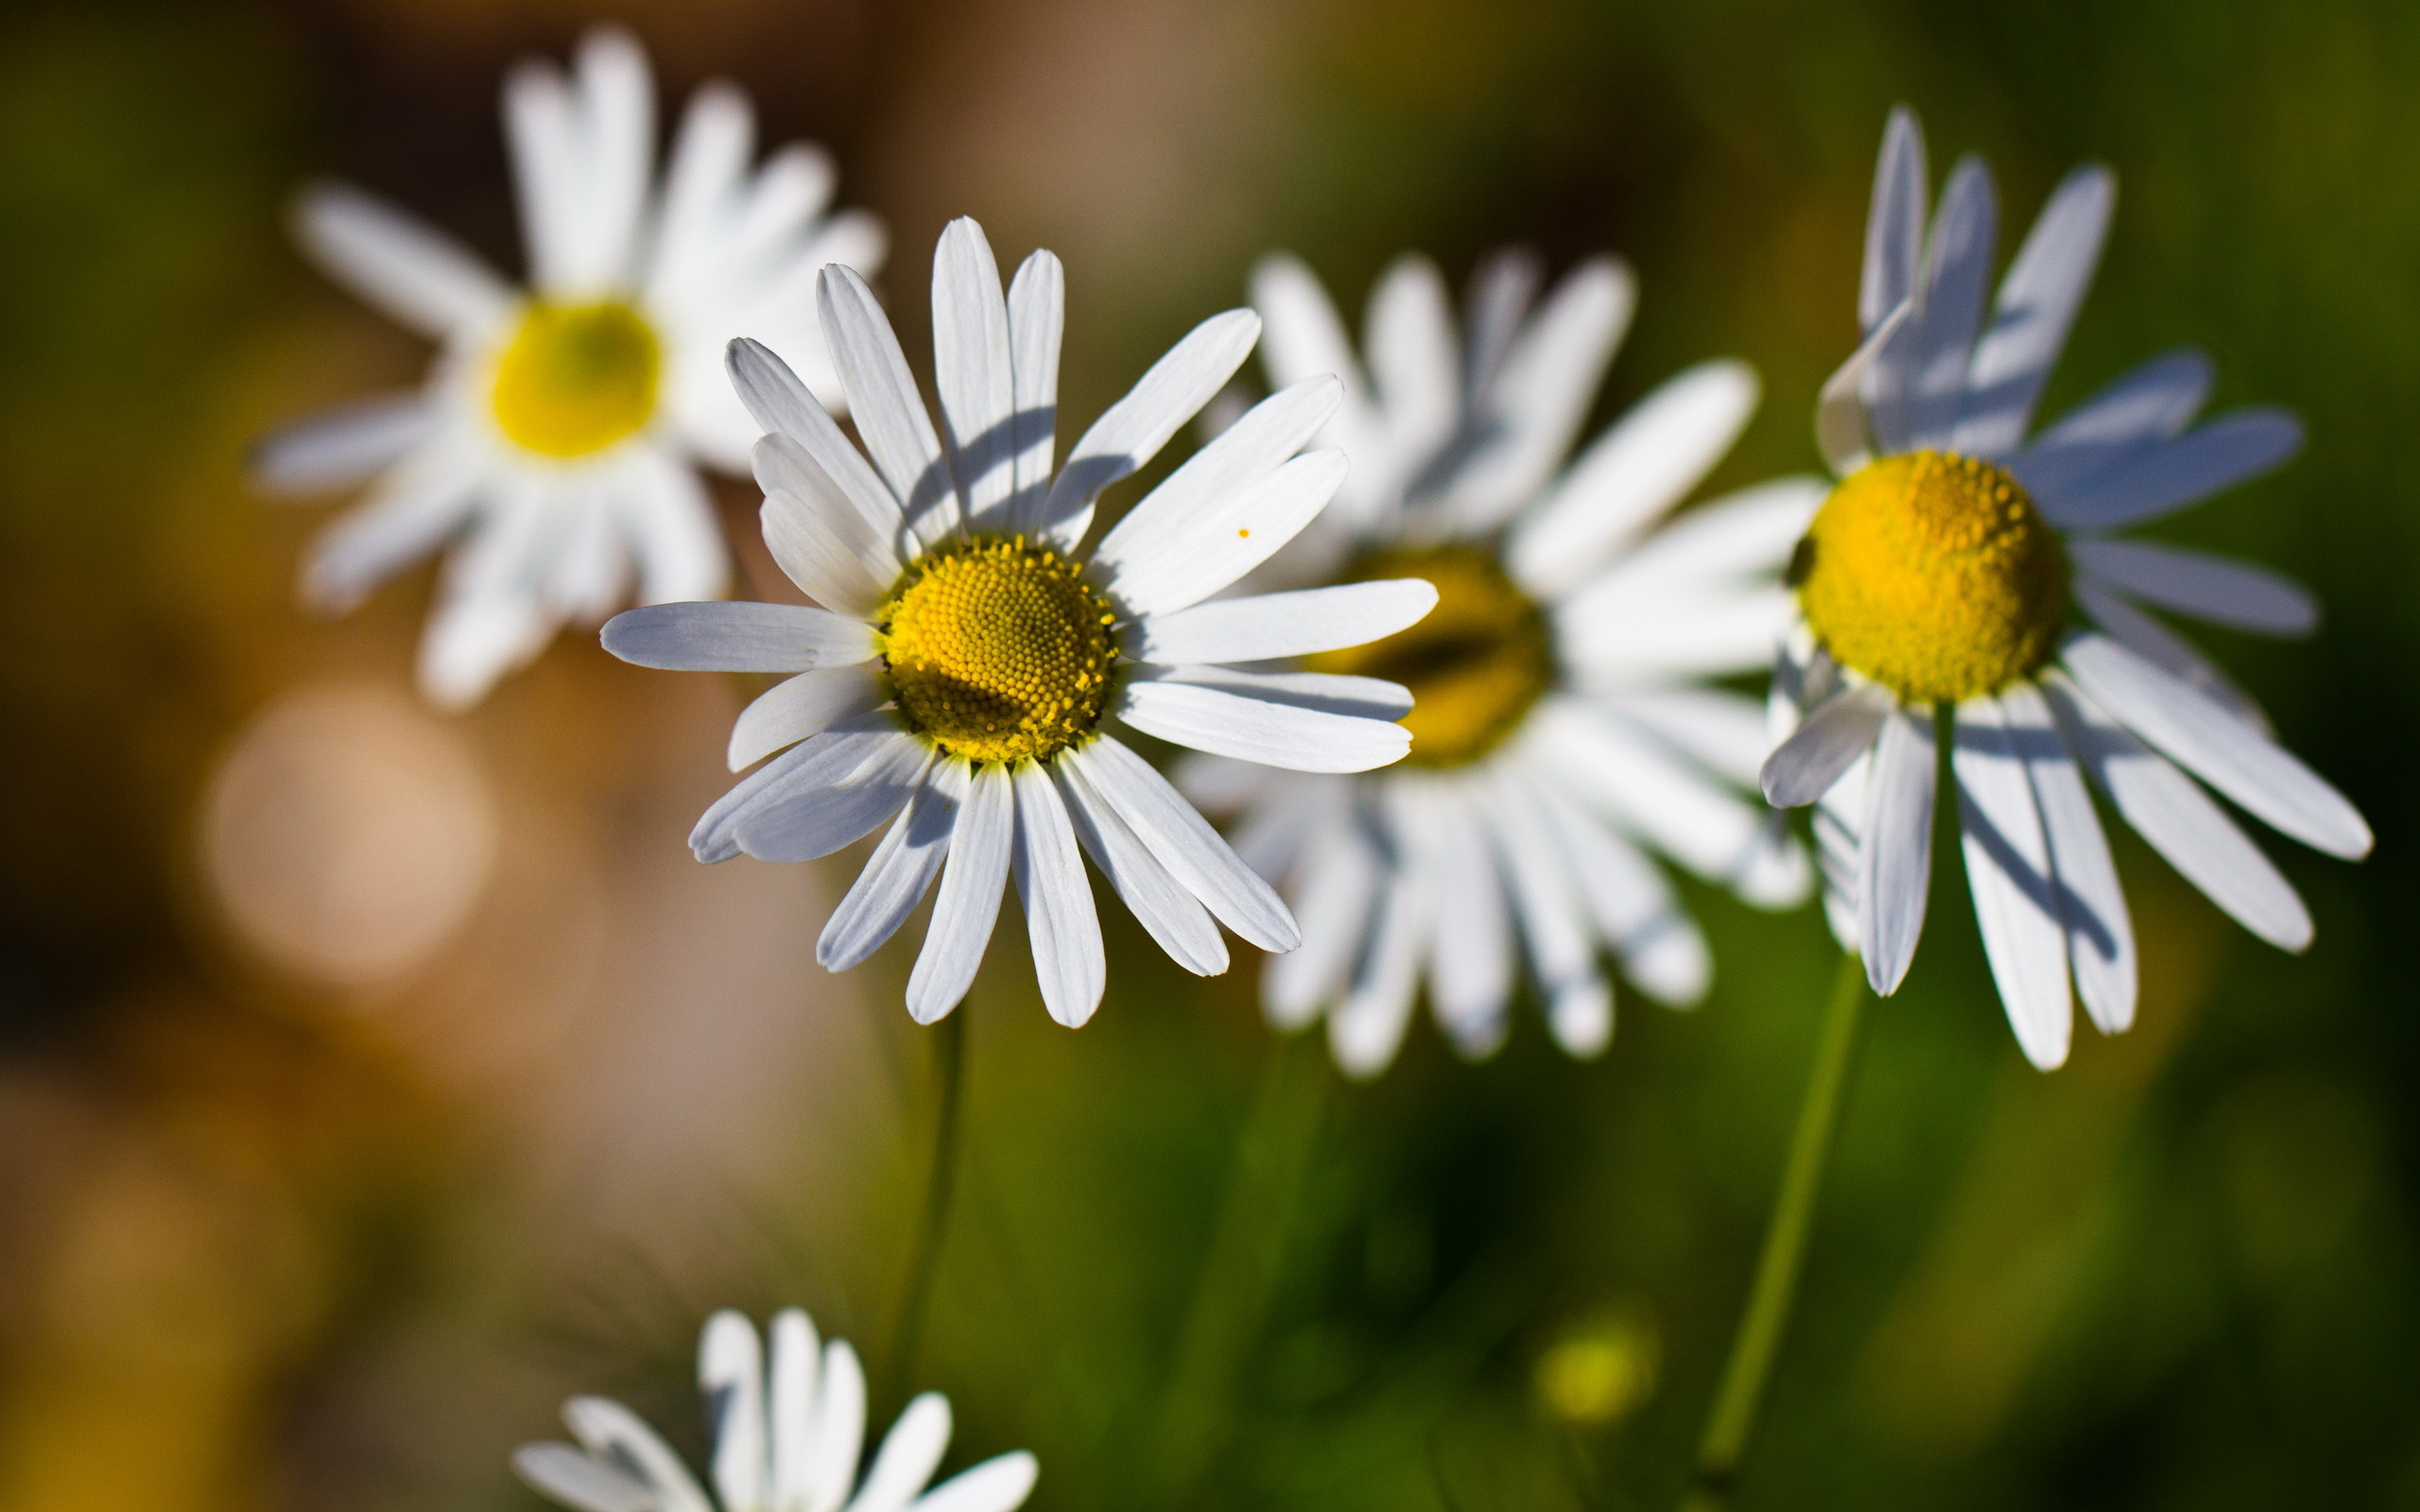 High Resolution Image Of Flowers, Desktop Wallpaper Of Chamomile within High Resolution Botanical Flowers